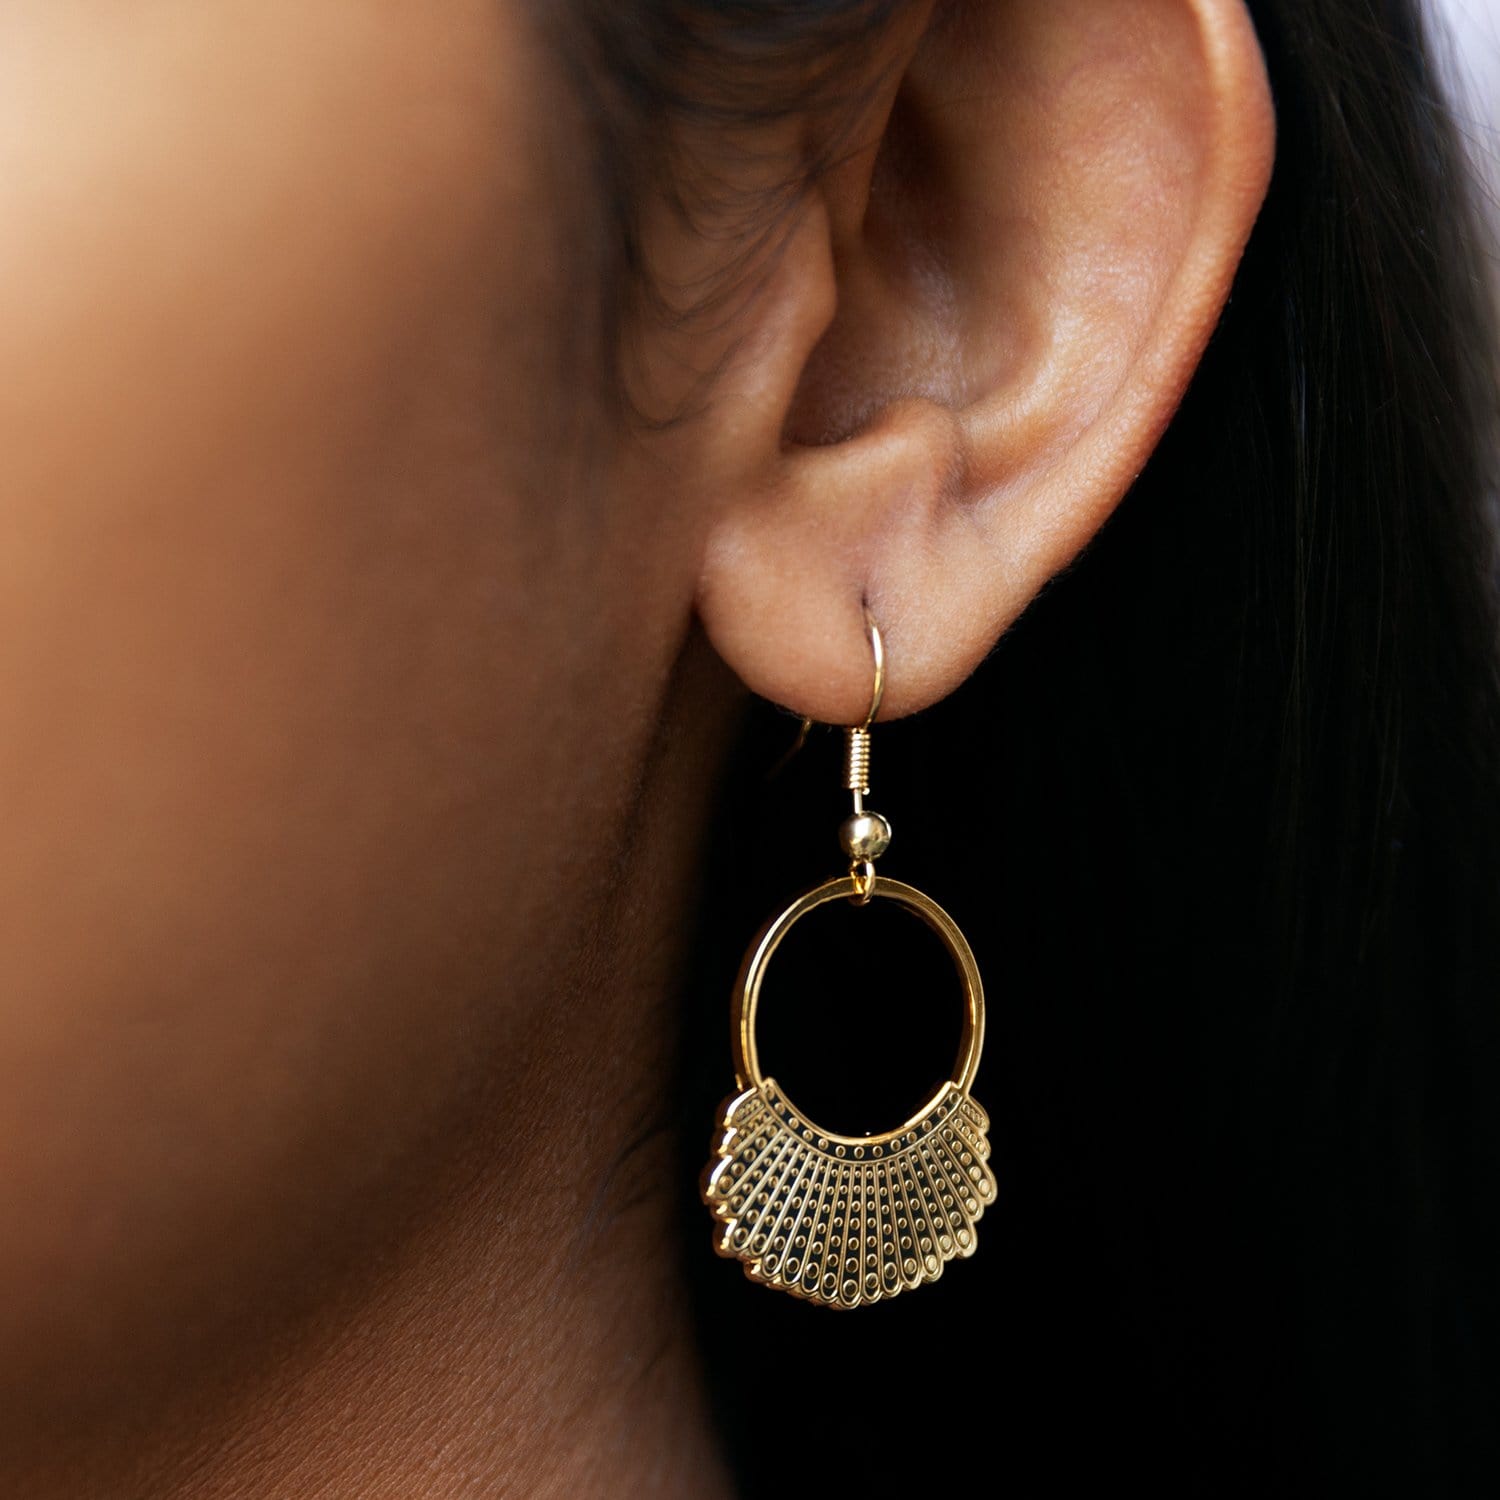 Dissent Collar Earrings Set - Get all four styles!